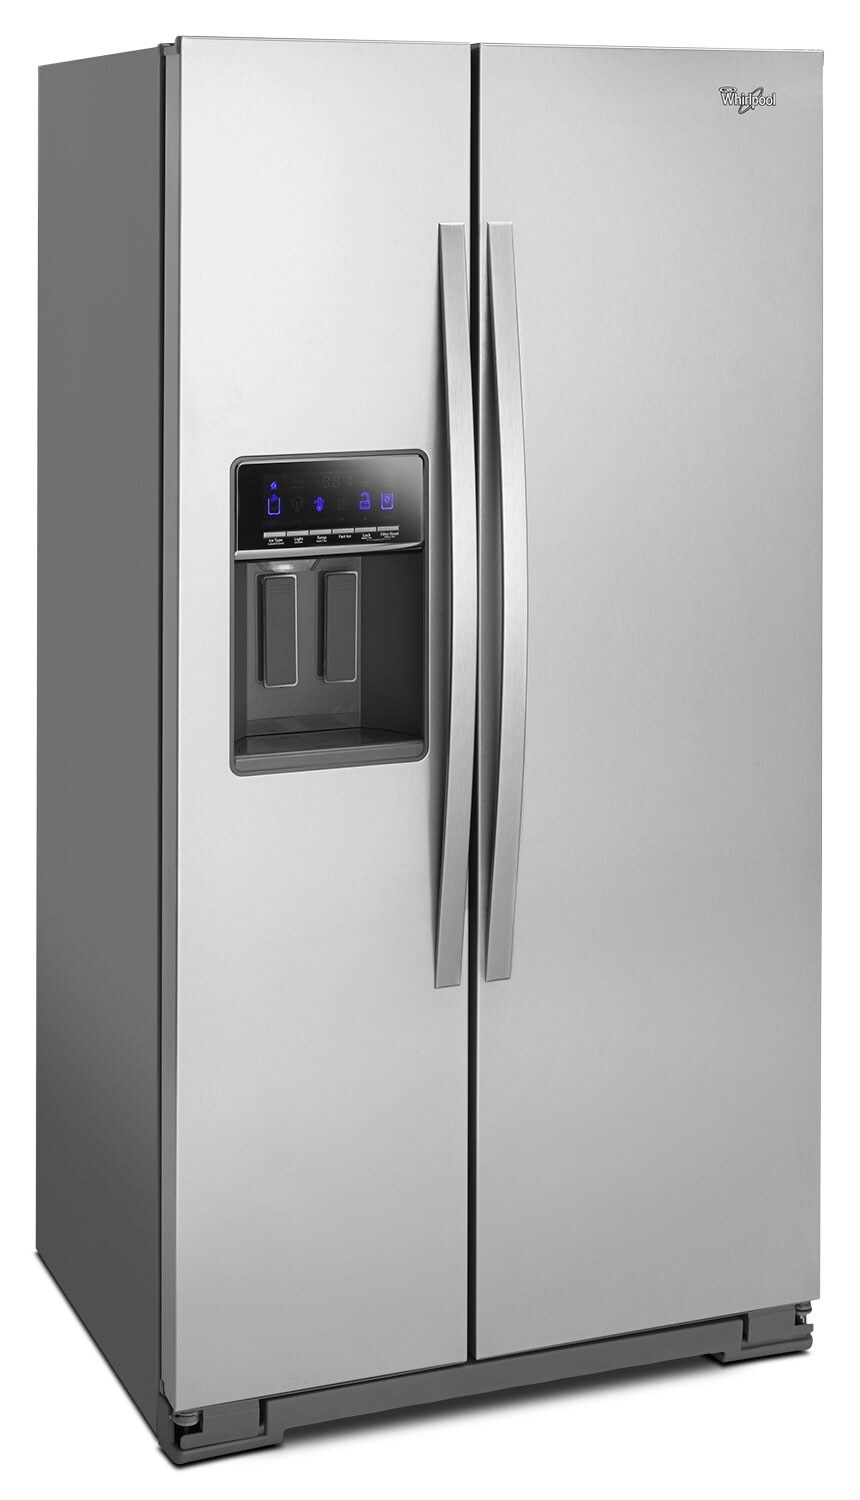 Whirlpool Refrigerator Side By Side Stainless Steel